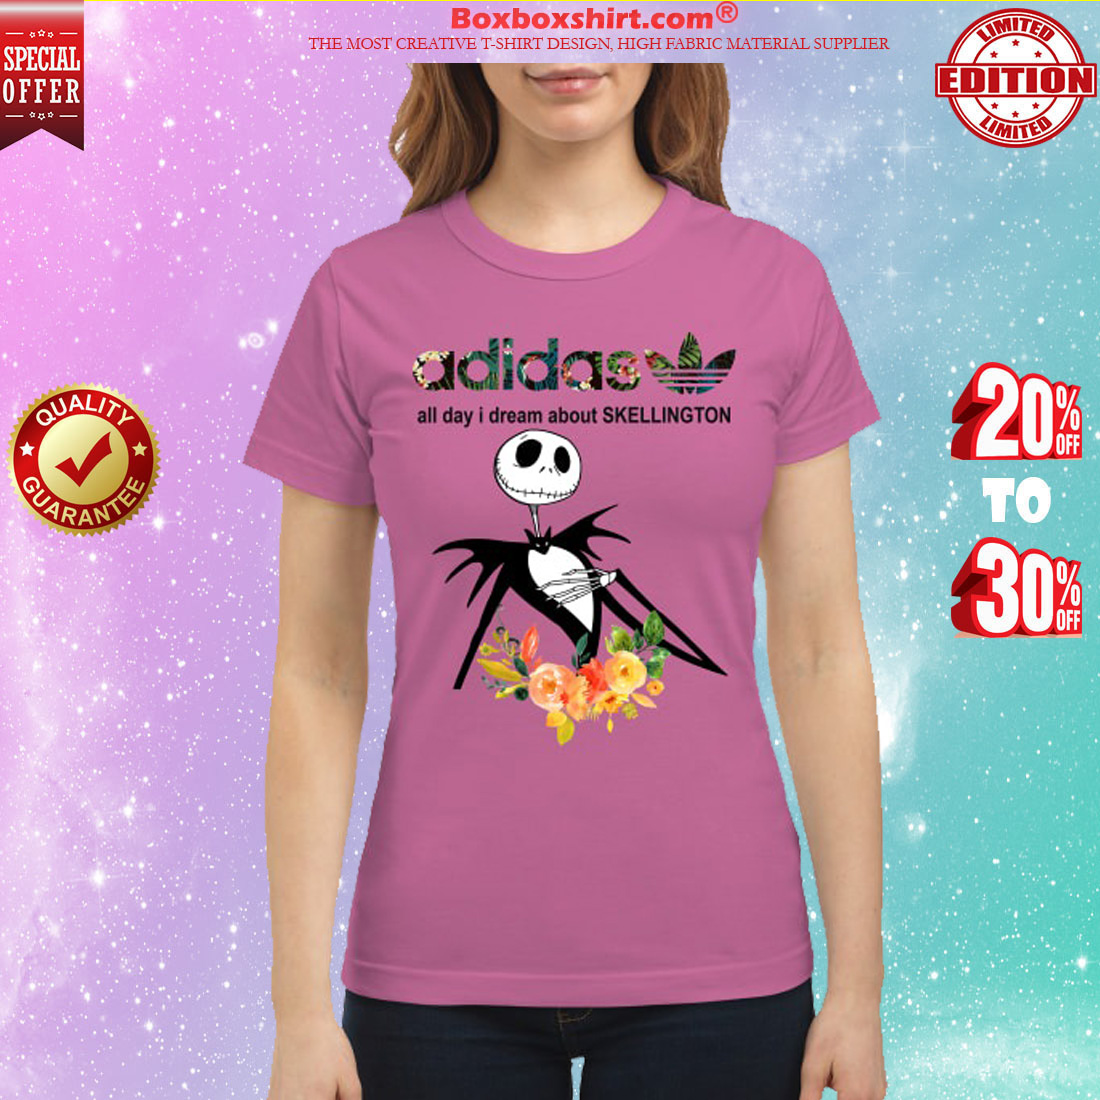 Adidas all day I dream about Jack Skellington classic shirt